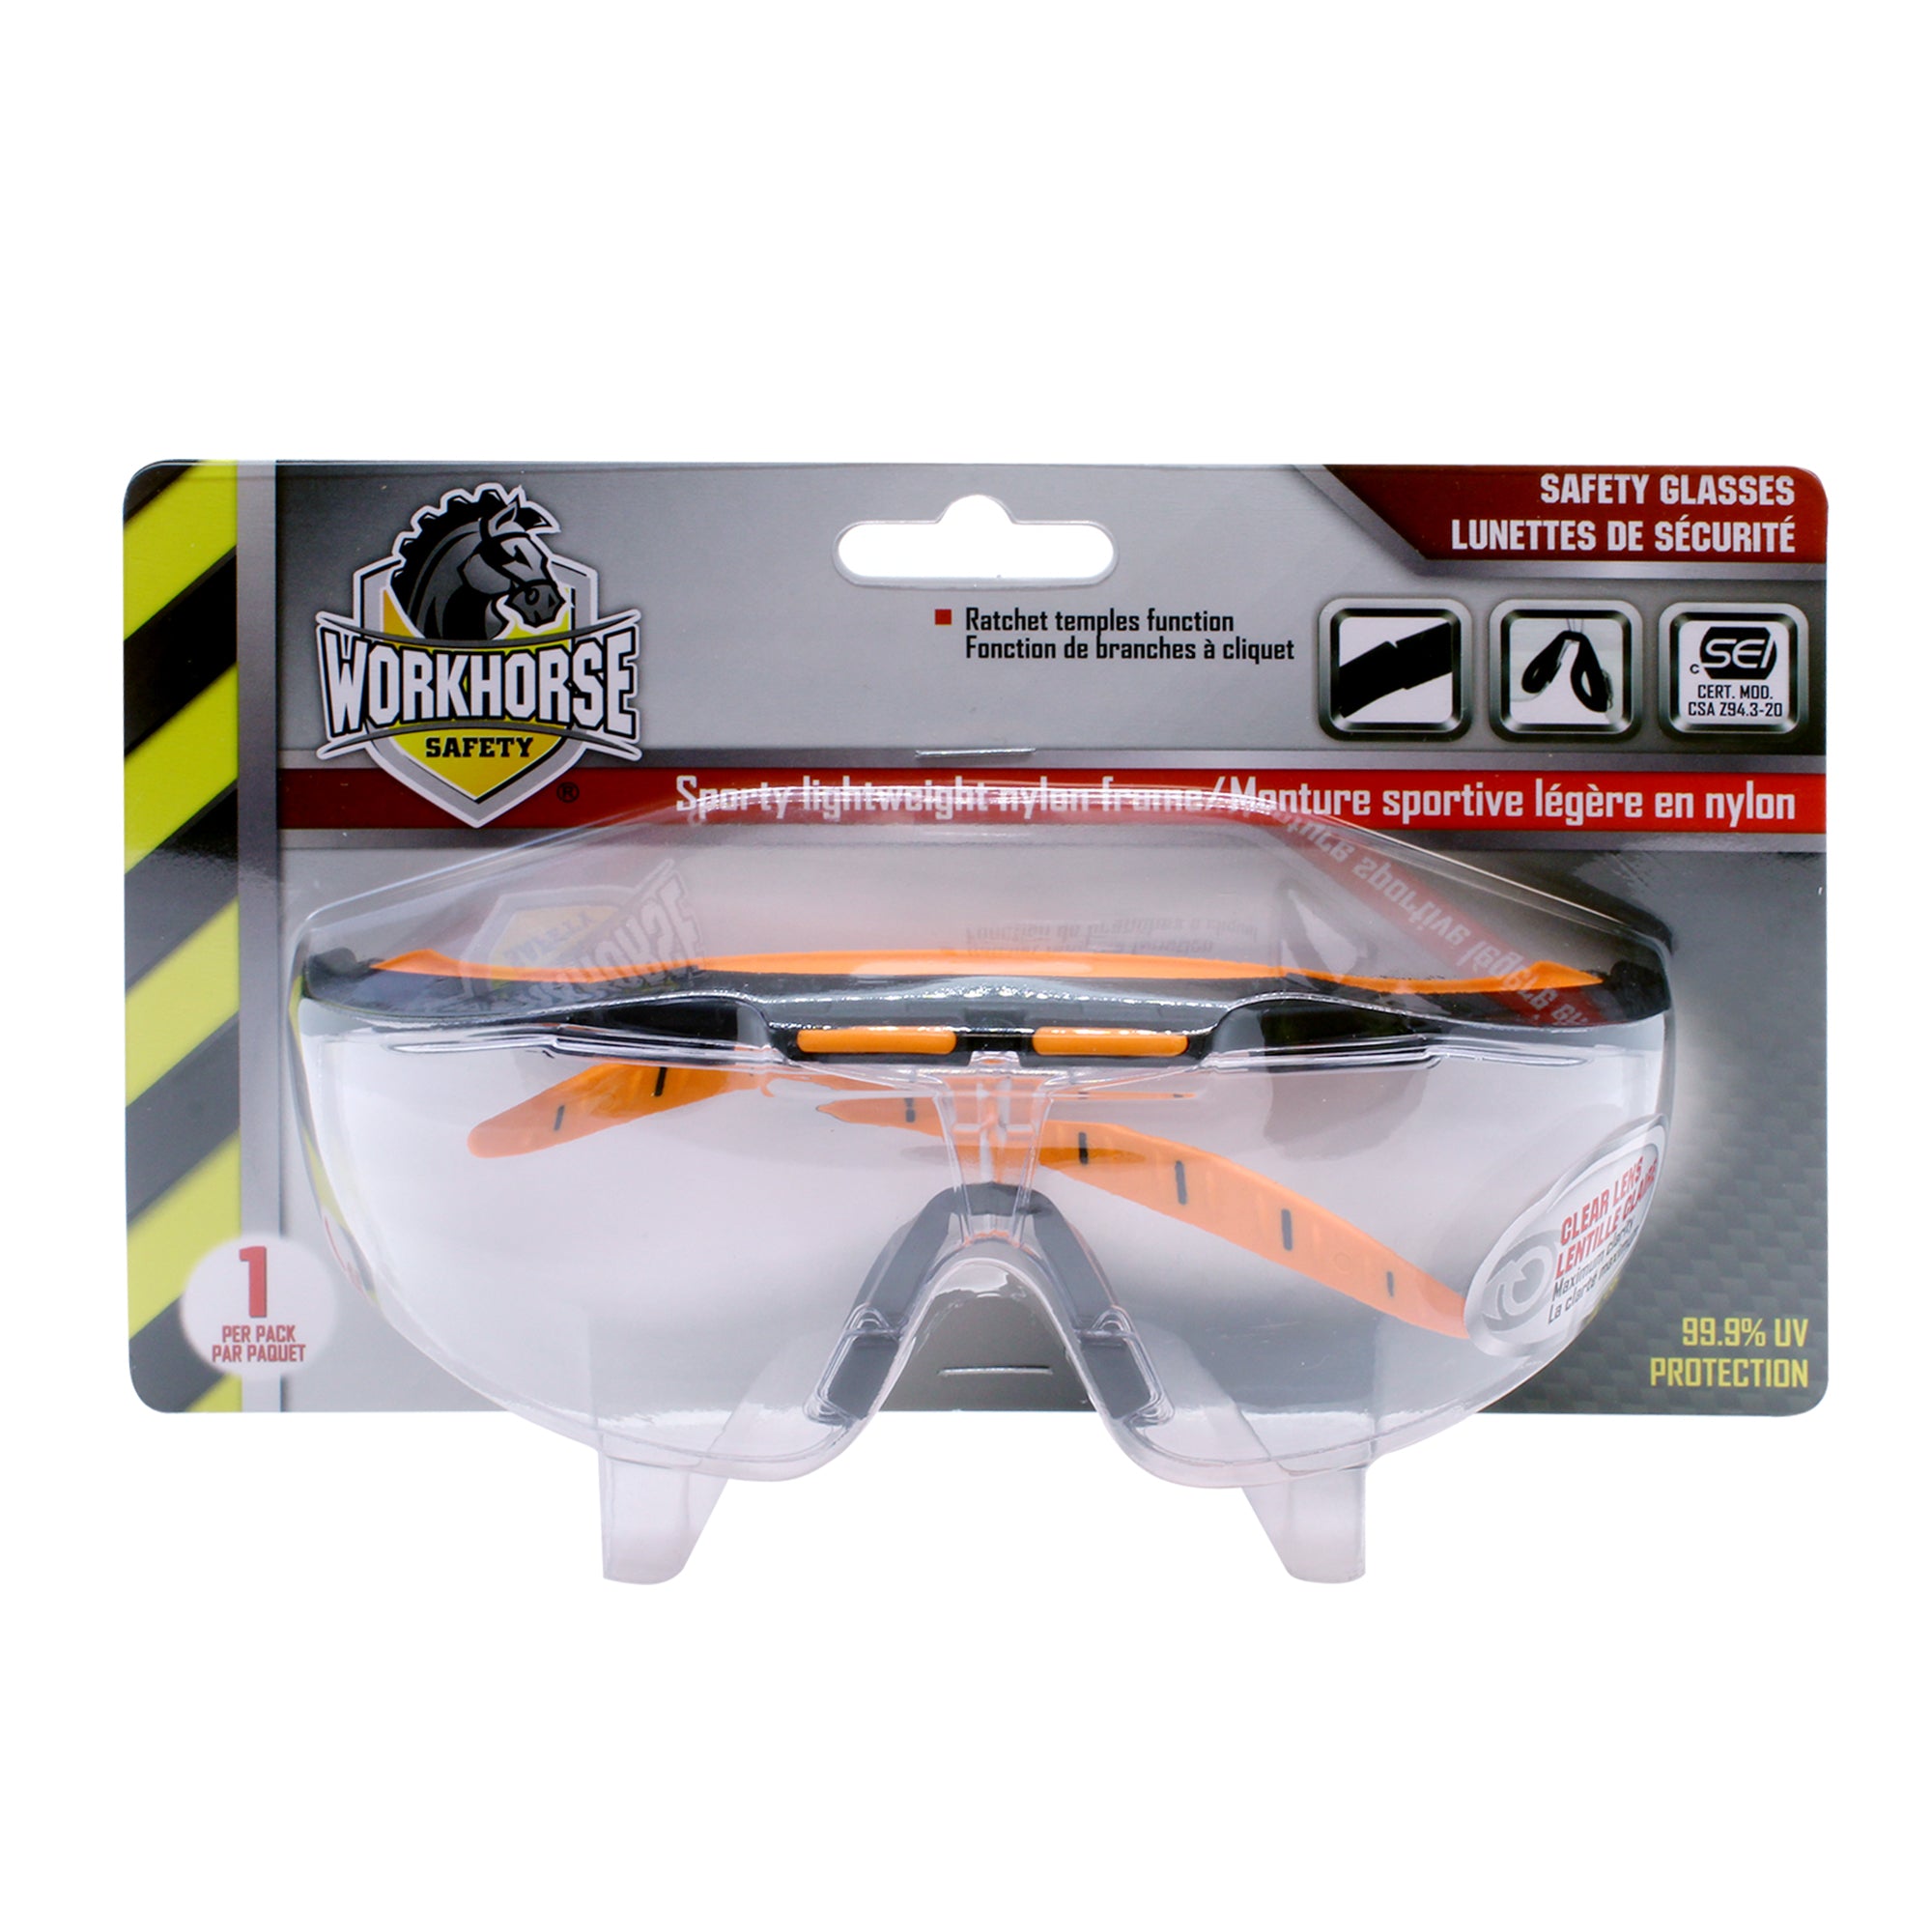 WORKHORSE® Safety Glasses with Built In Brow Guard and Ratchet Adjustable Temples for Perfect Fit, Clear